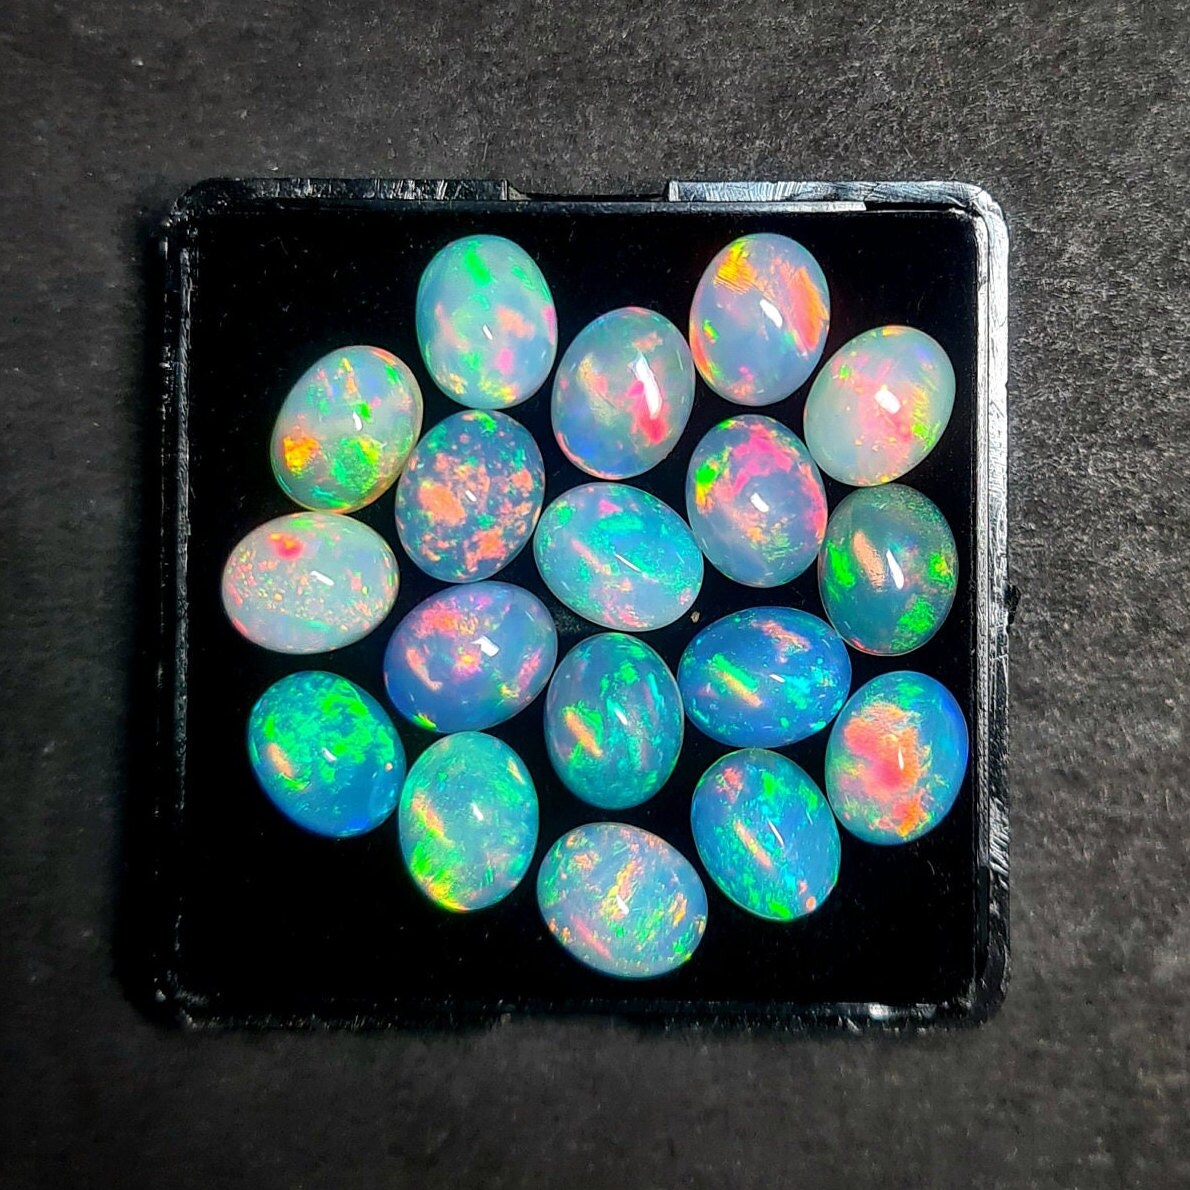 Beautiful Multi Play fire Ethiopian Opal 8x11 mm Oval Gemstone Cabochon, Calibrated Opal Stone, Natural Fire Opal Loose Stone For Jewelry Making.(Natural)